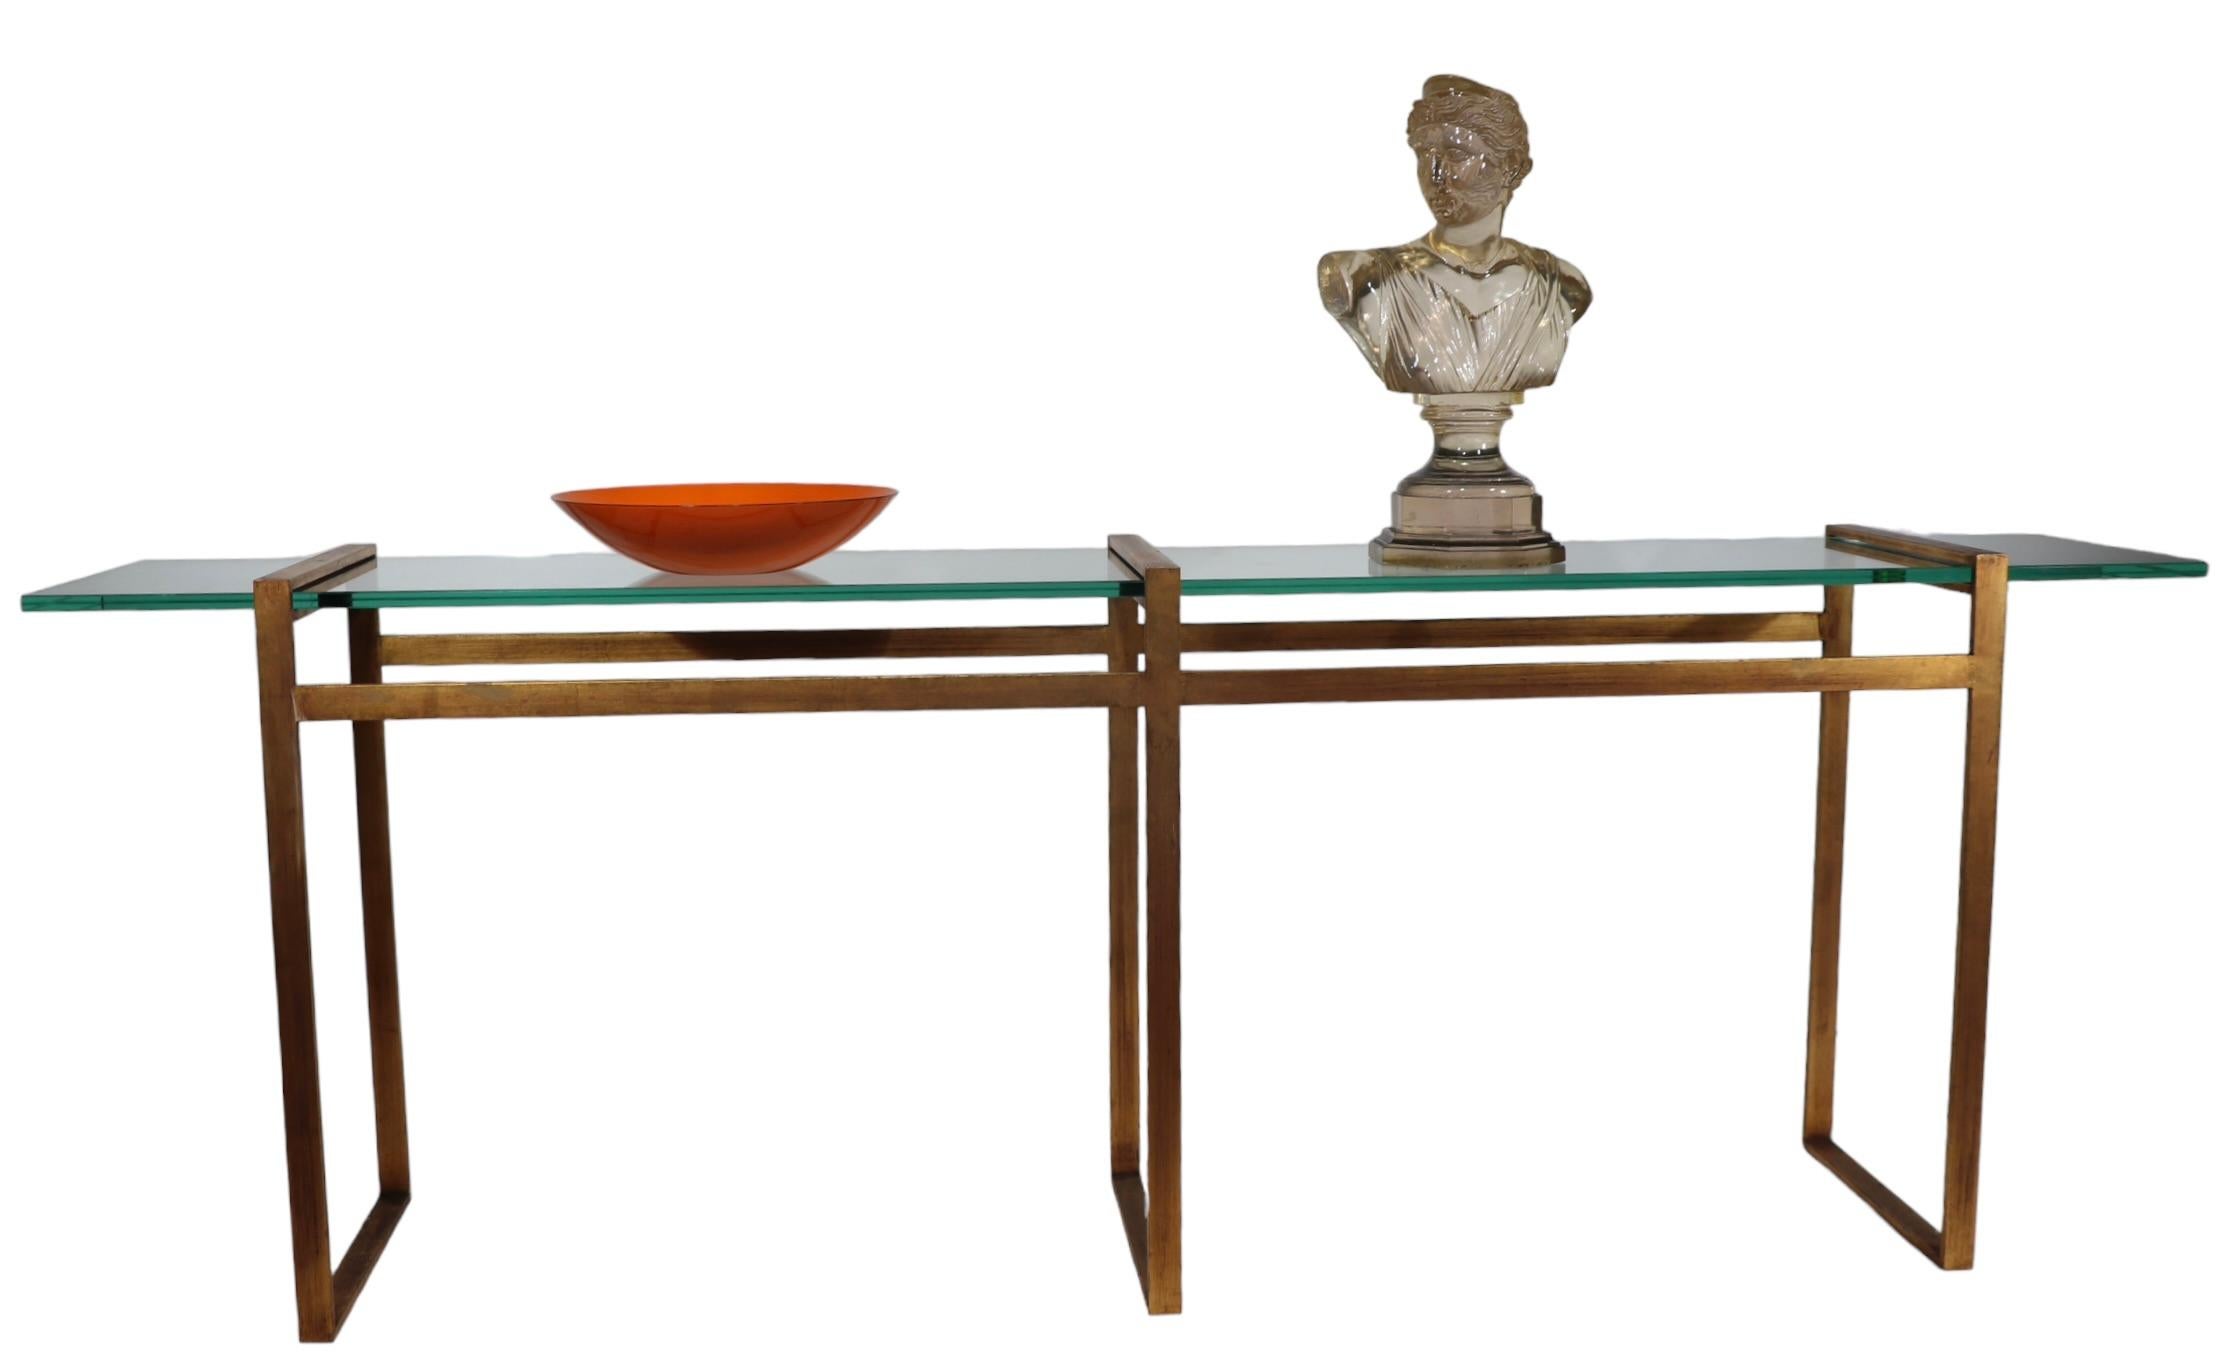 Large Modernist Metal and Glass Console in Faux Gilt Finish c 1970’s In Good Condition For Sale In New York, NY